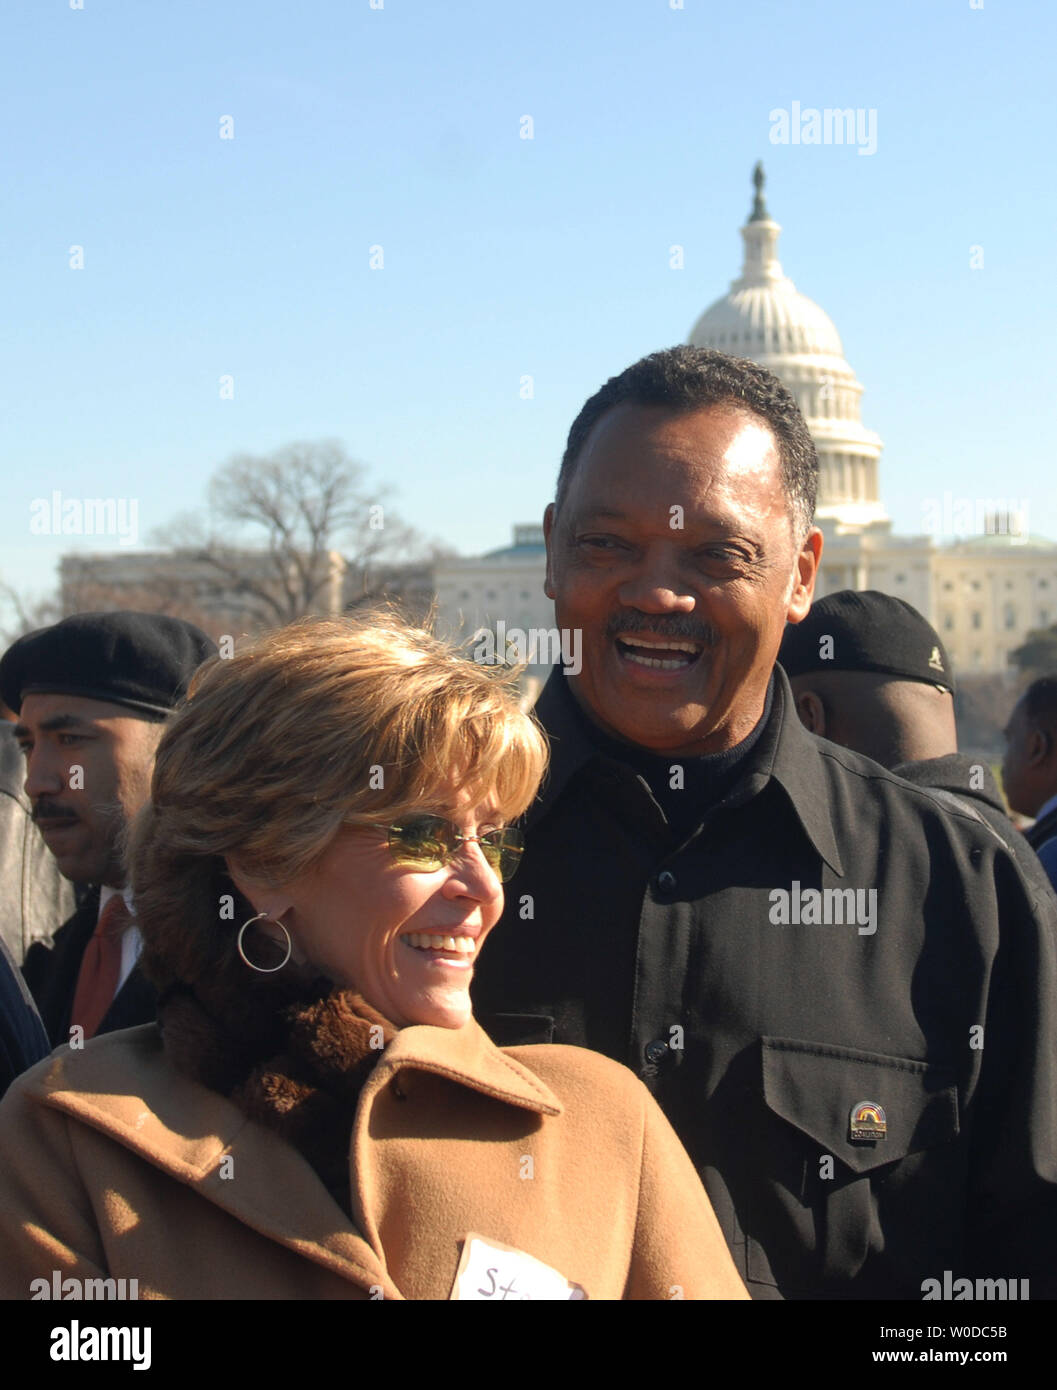 Actress/activist Jane Fonda (R) and Reverend Jesse Jackson talk behind the stage at a peace rally on the National Mall in Washington on January 27, 2007. Tens of thousands of protesters marched to the Capitol against the Iraq War. (UPI Photo/Alexis C. Glenn) Stock Photo